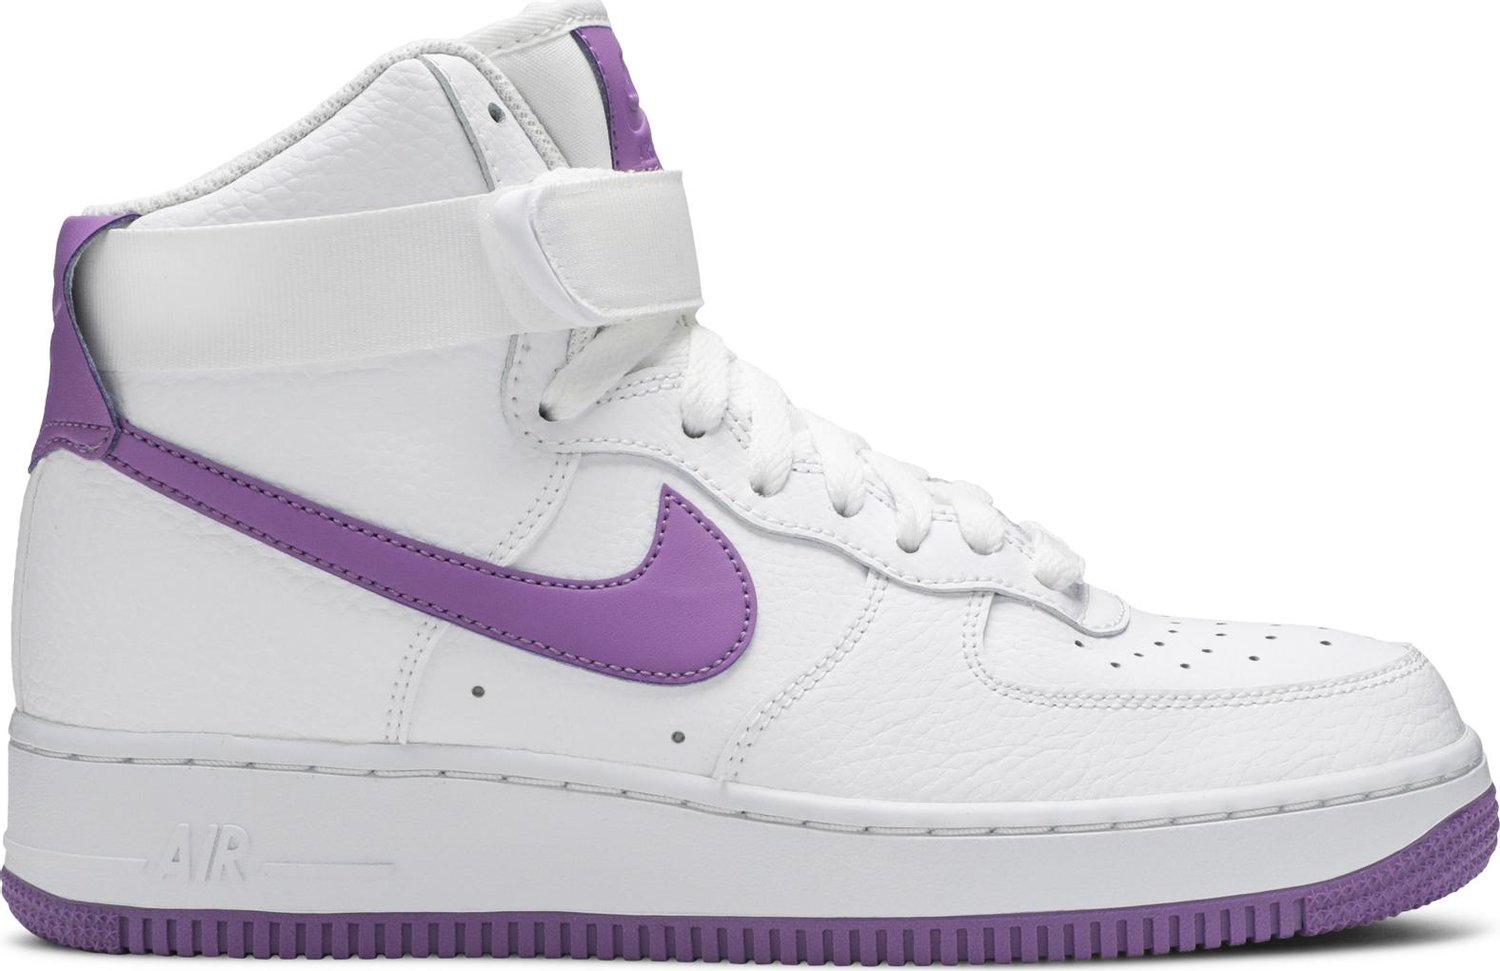 Buy Wmns Air Force 1 High 'White Dark Orchid' - 334031 112 | GOAT